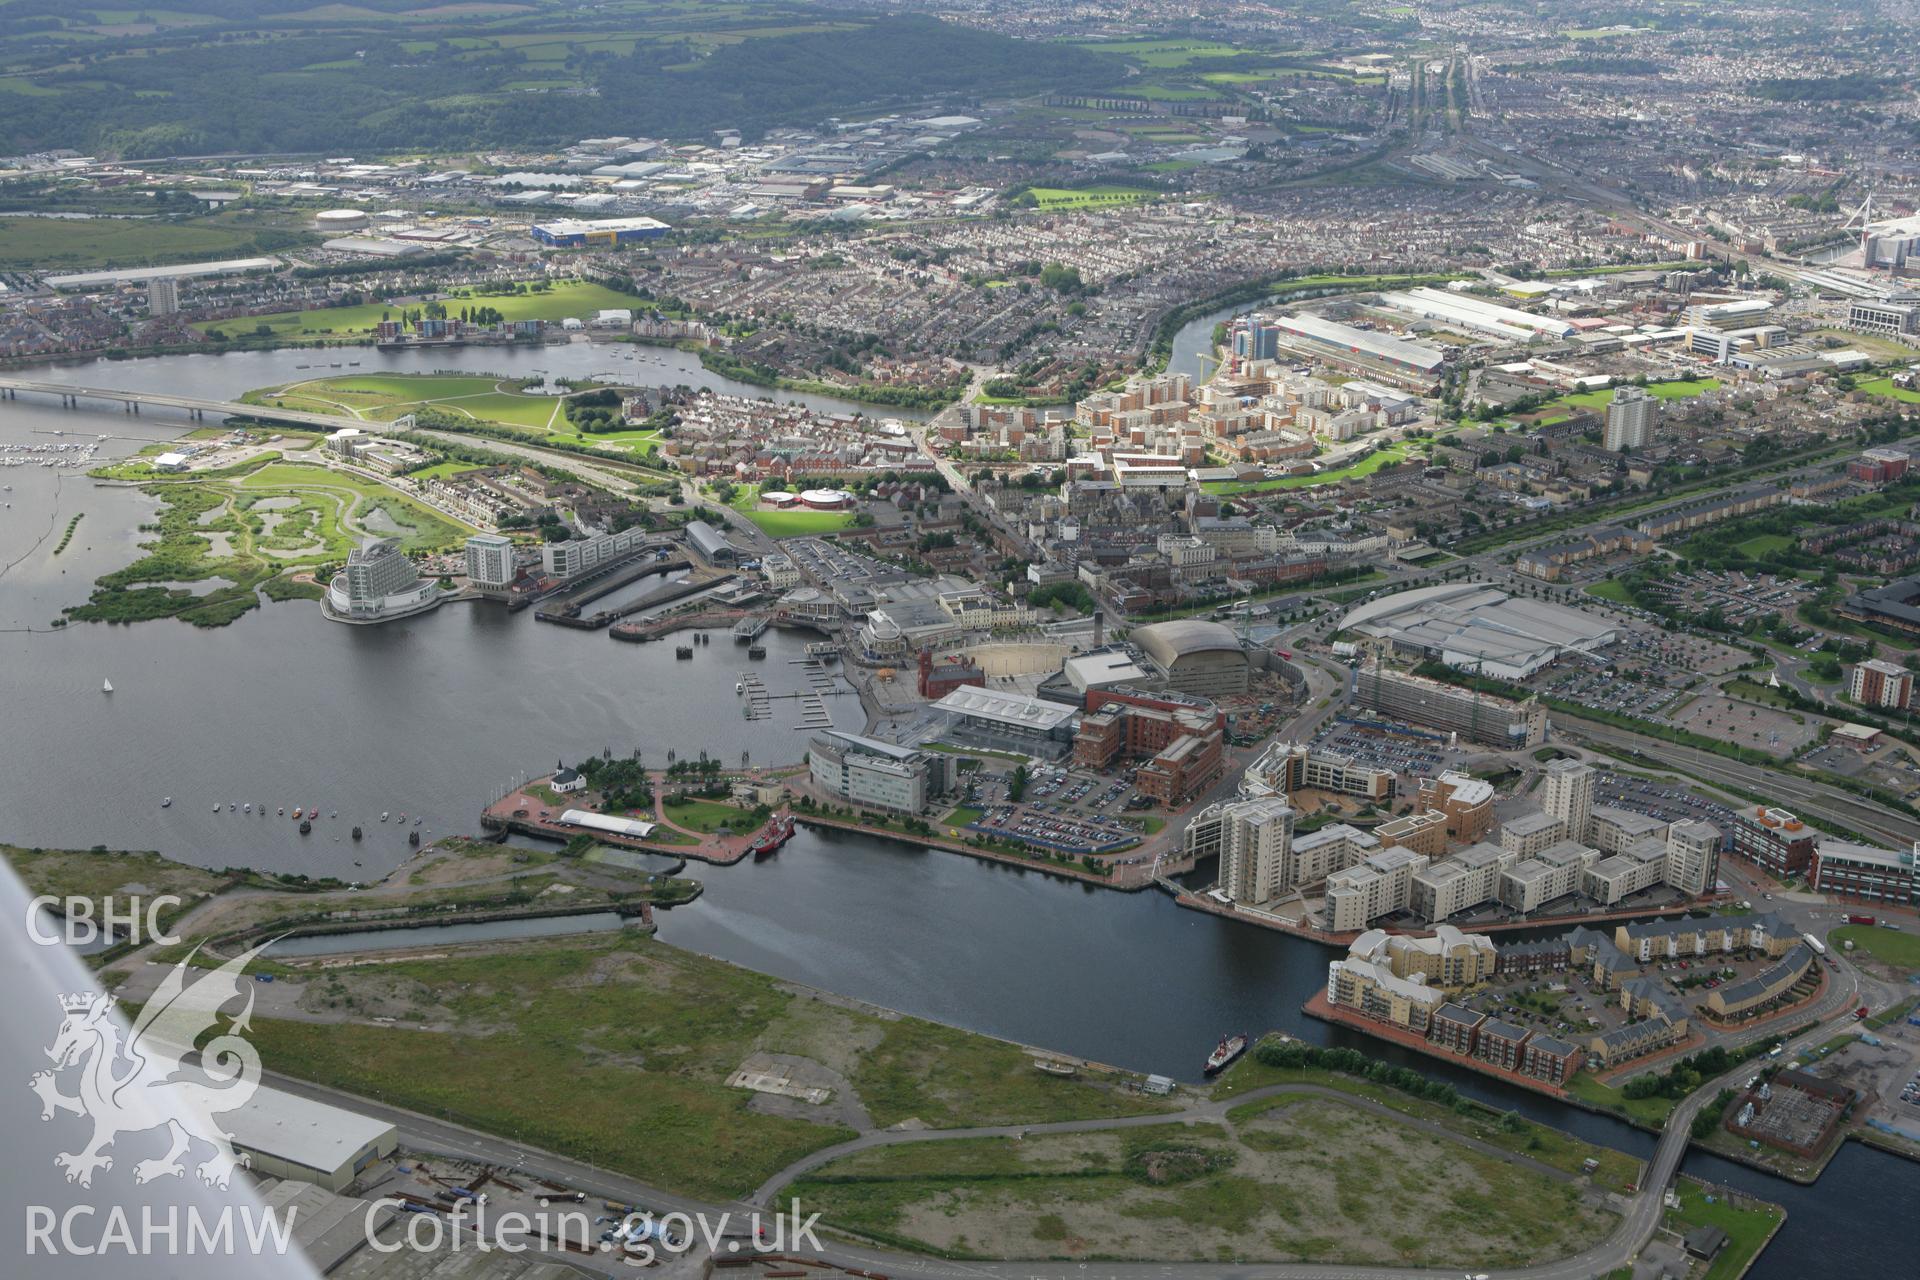 RCAHMW colour oblique aerial photograph of Cardiff Docks, Cardiff. Taken on 30 July 2007 by Toby Driver